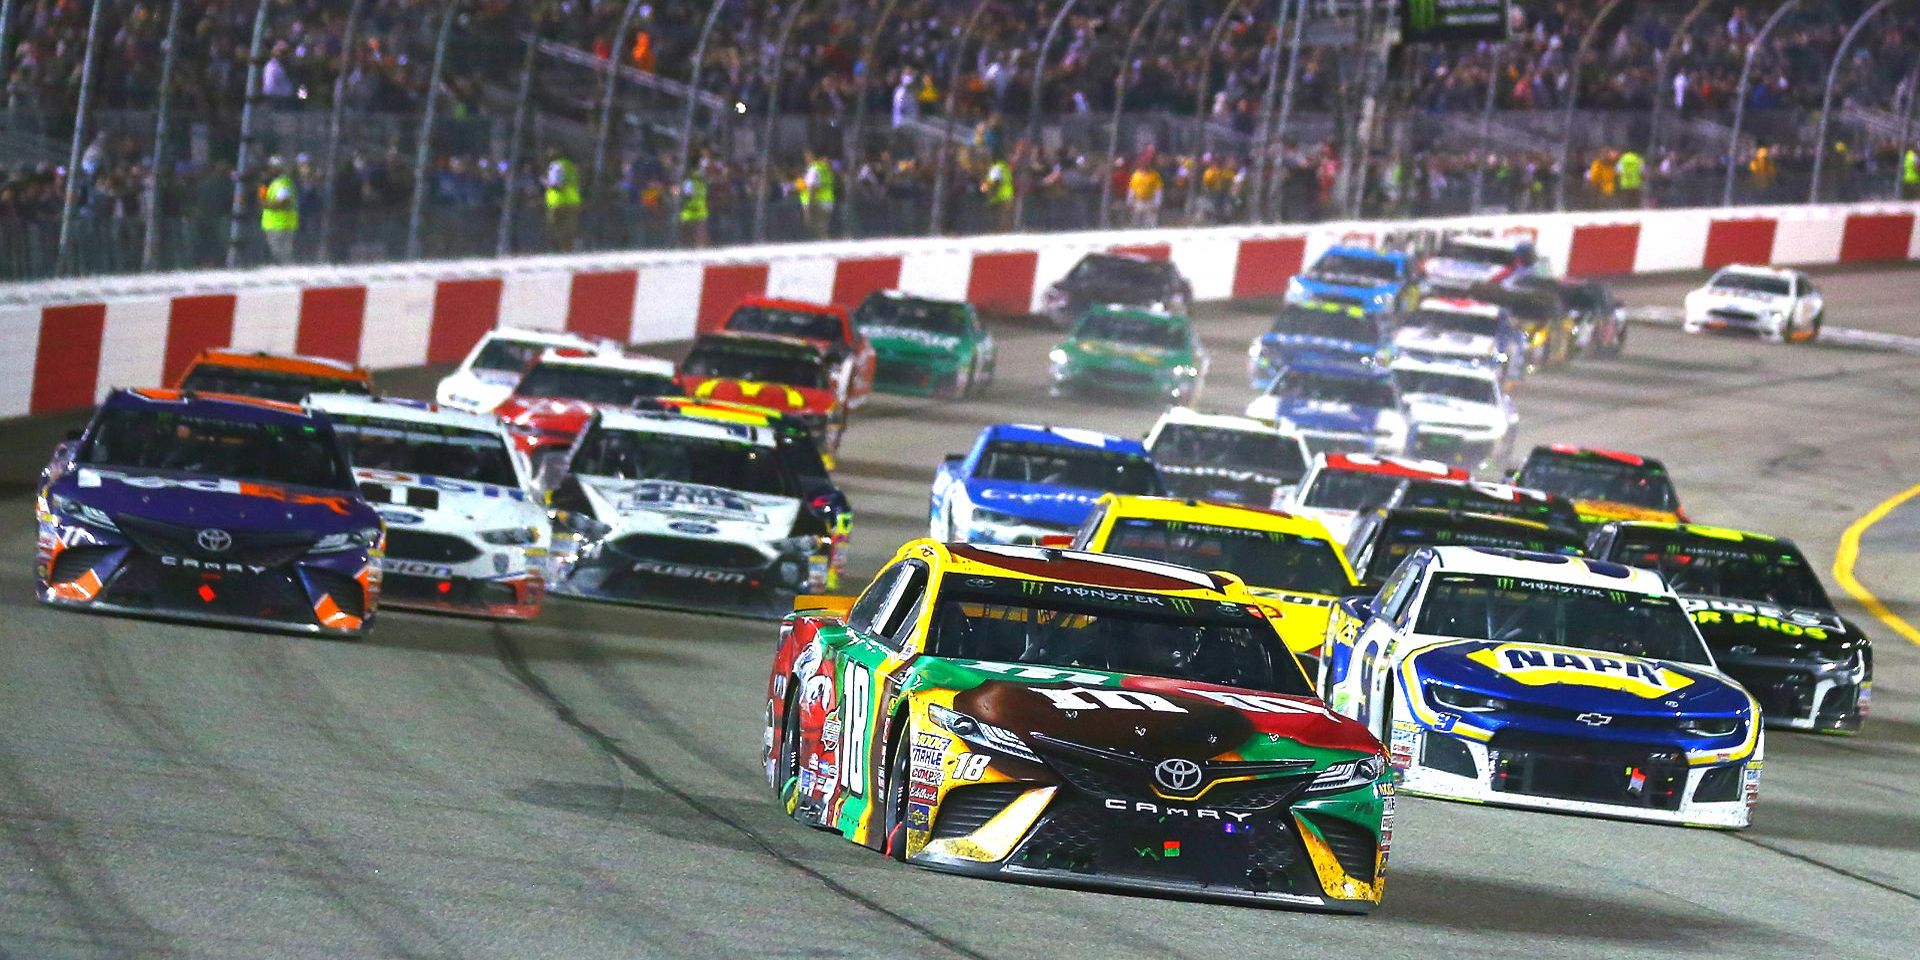 Nascar: 10 Best Tracks To Watch The Race, Ranked | HotCars